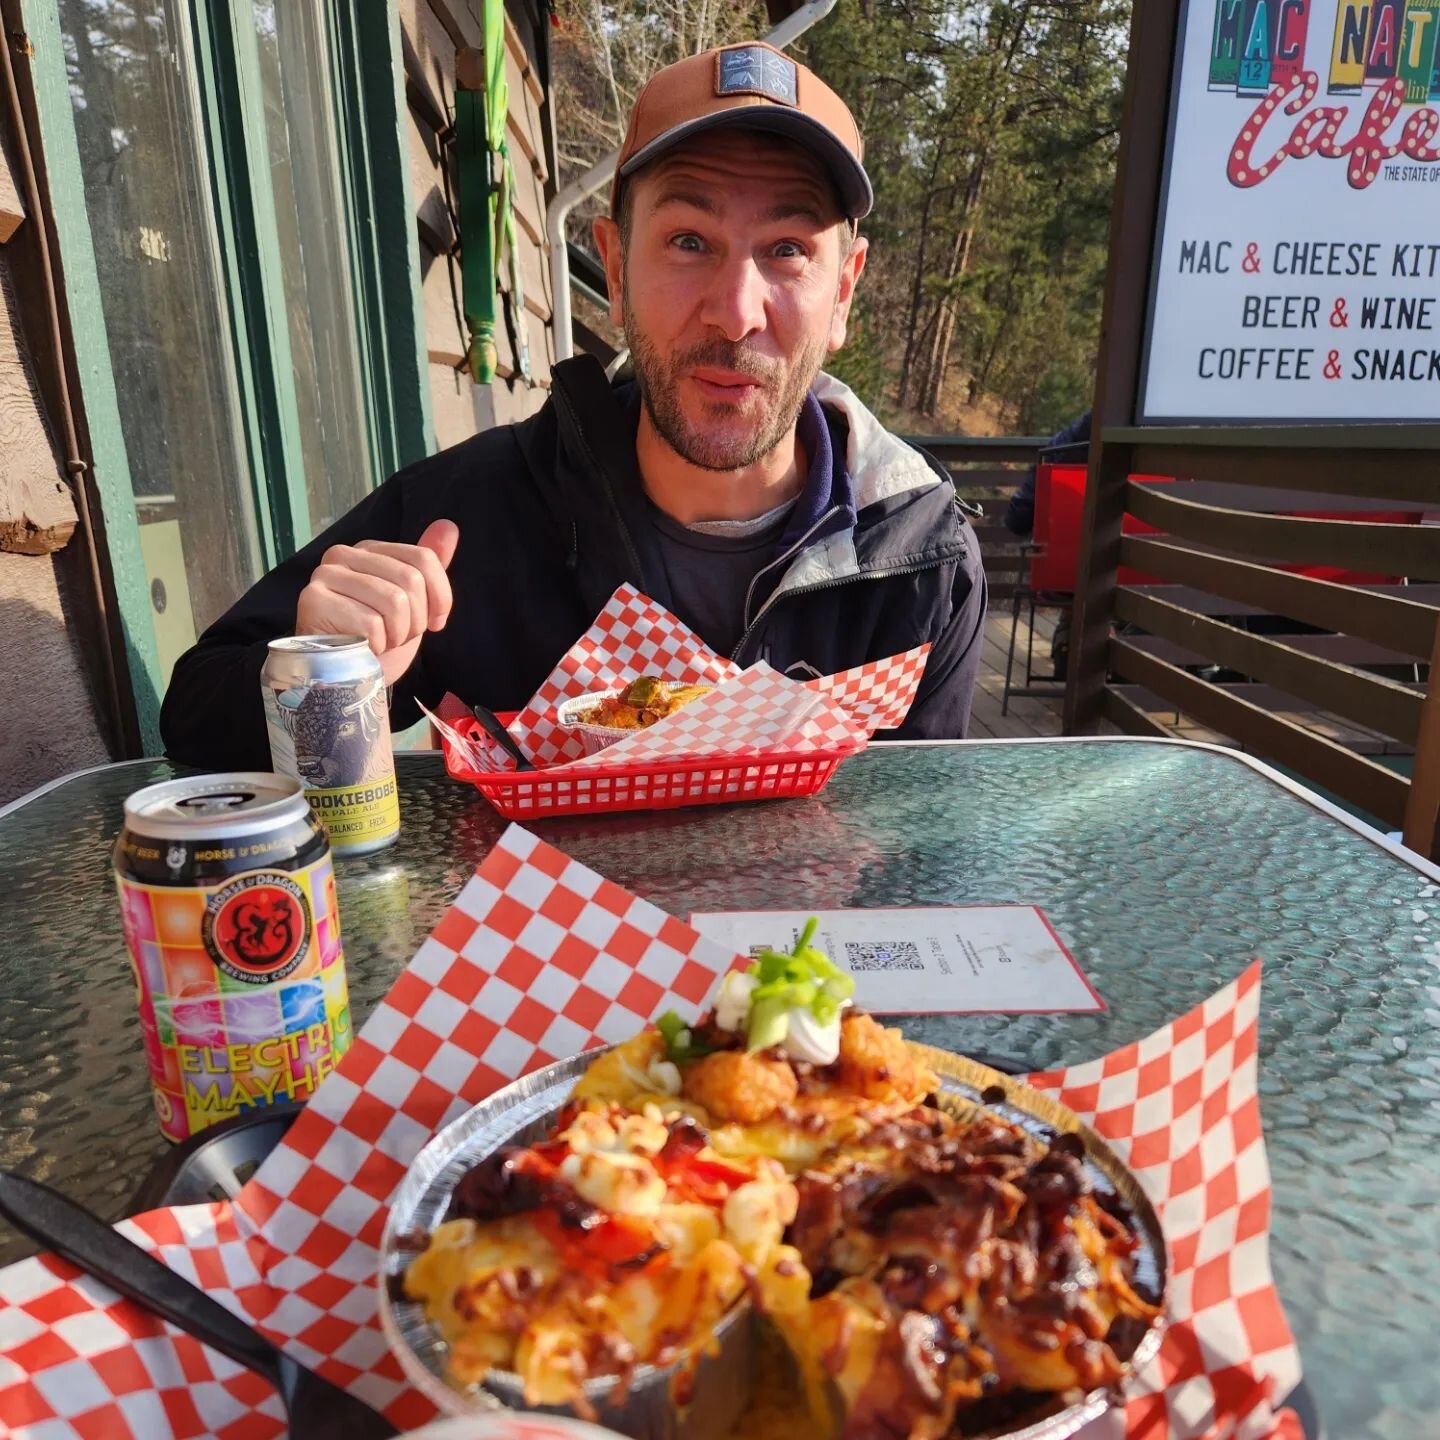 Beautiful hike in Evergreen, followed by the literal best mac and cheese in the nation. I mean, look at the excitement on that face. This is how you weekend.